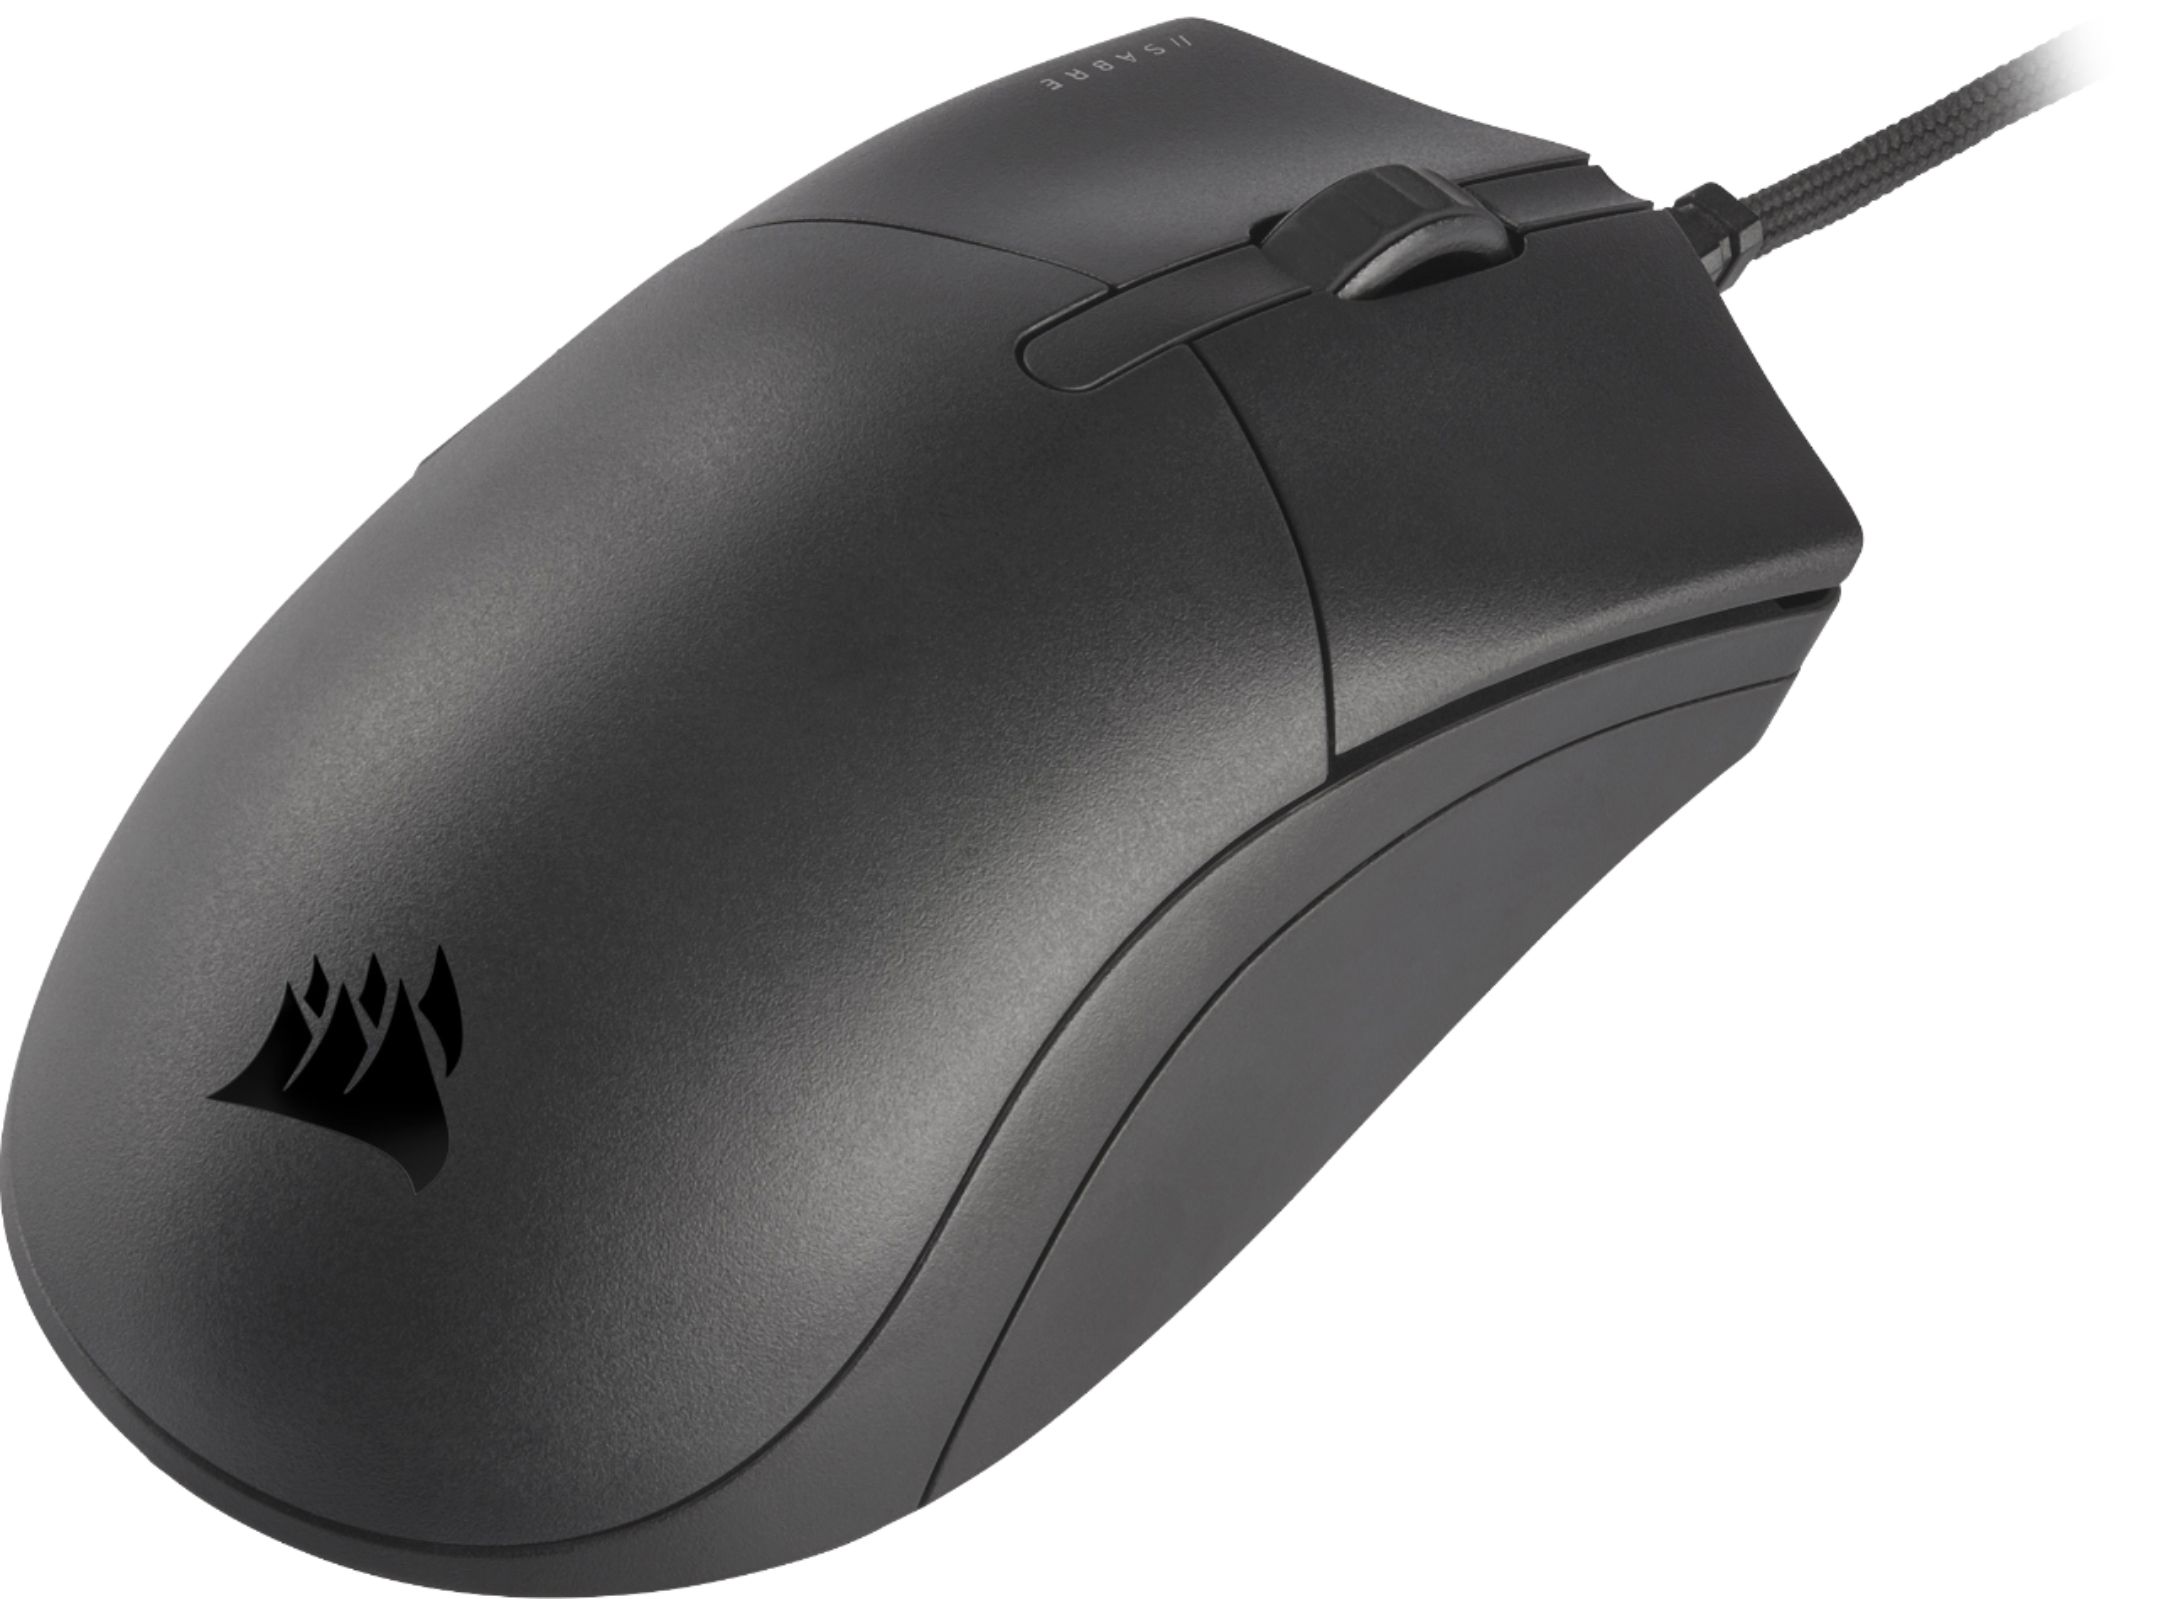 Back View: Arozzi - Favo Light Weight Gaming Mouse - Gray